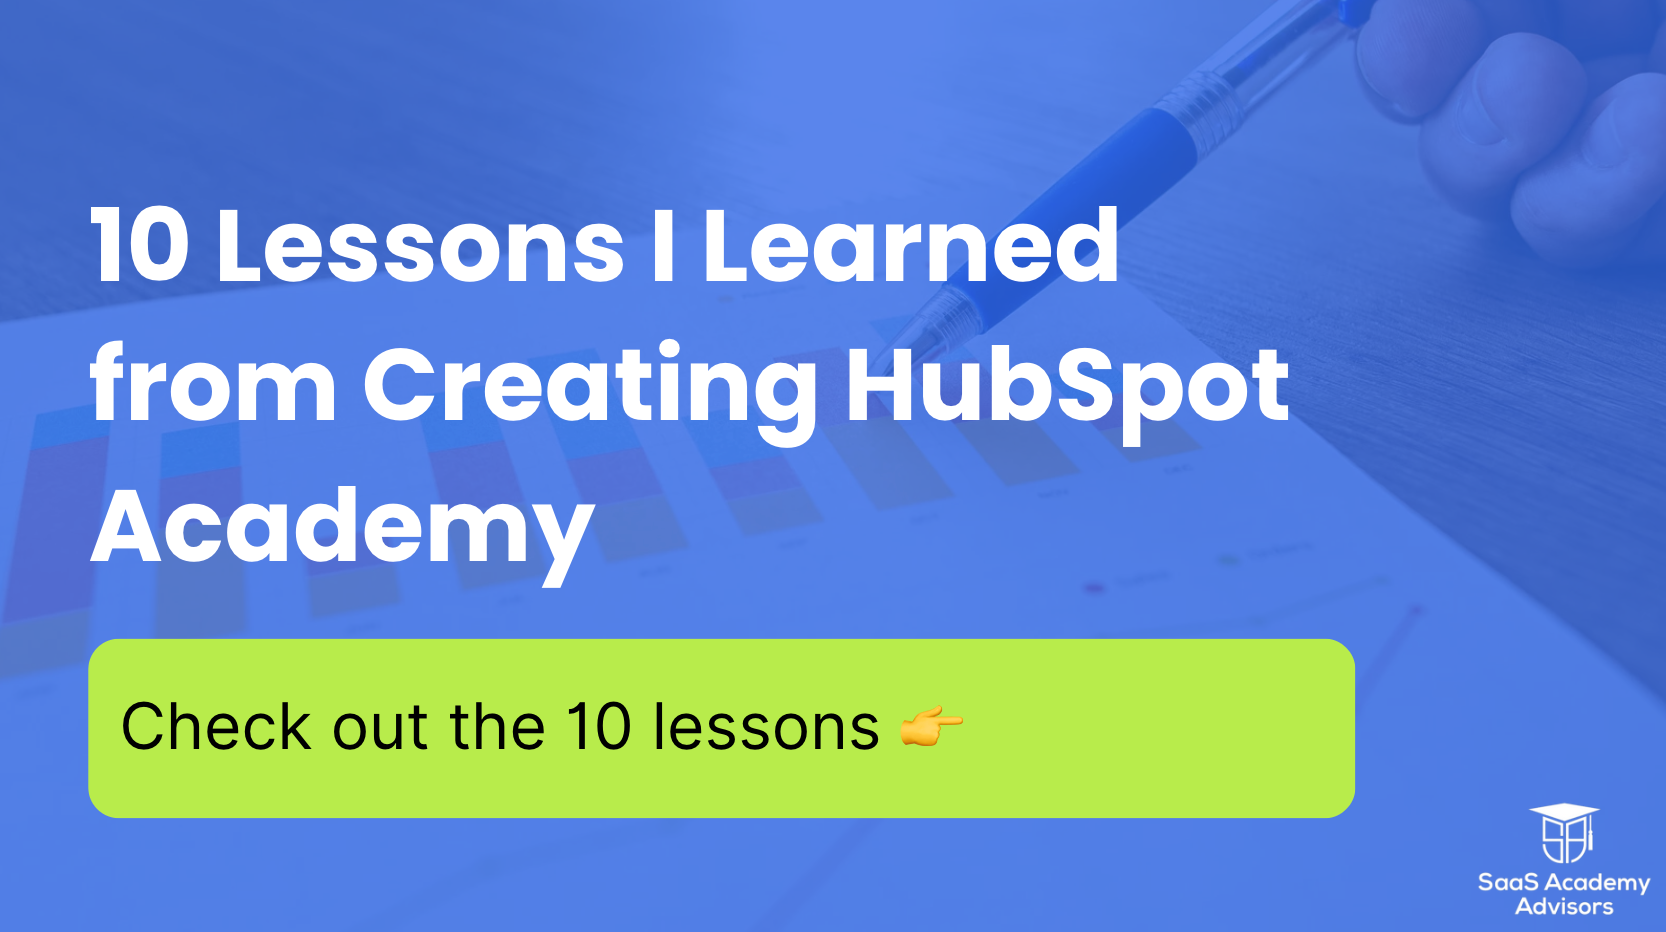 10 Lessons I Learned from Creating HubSpot Academy